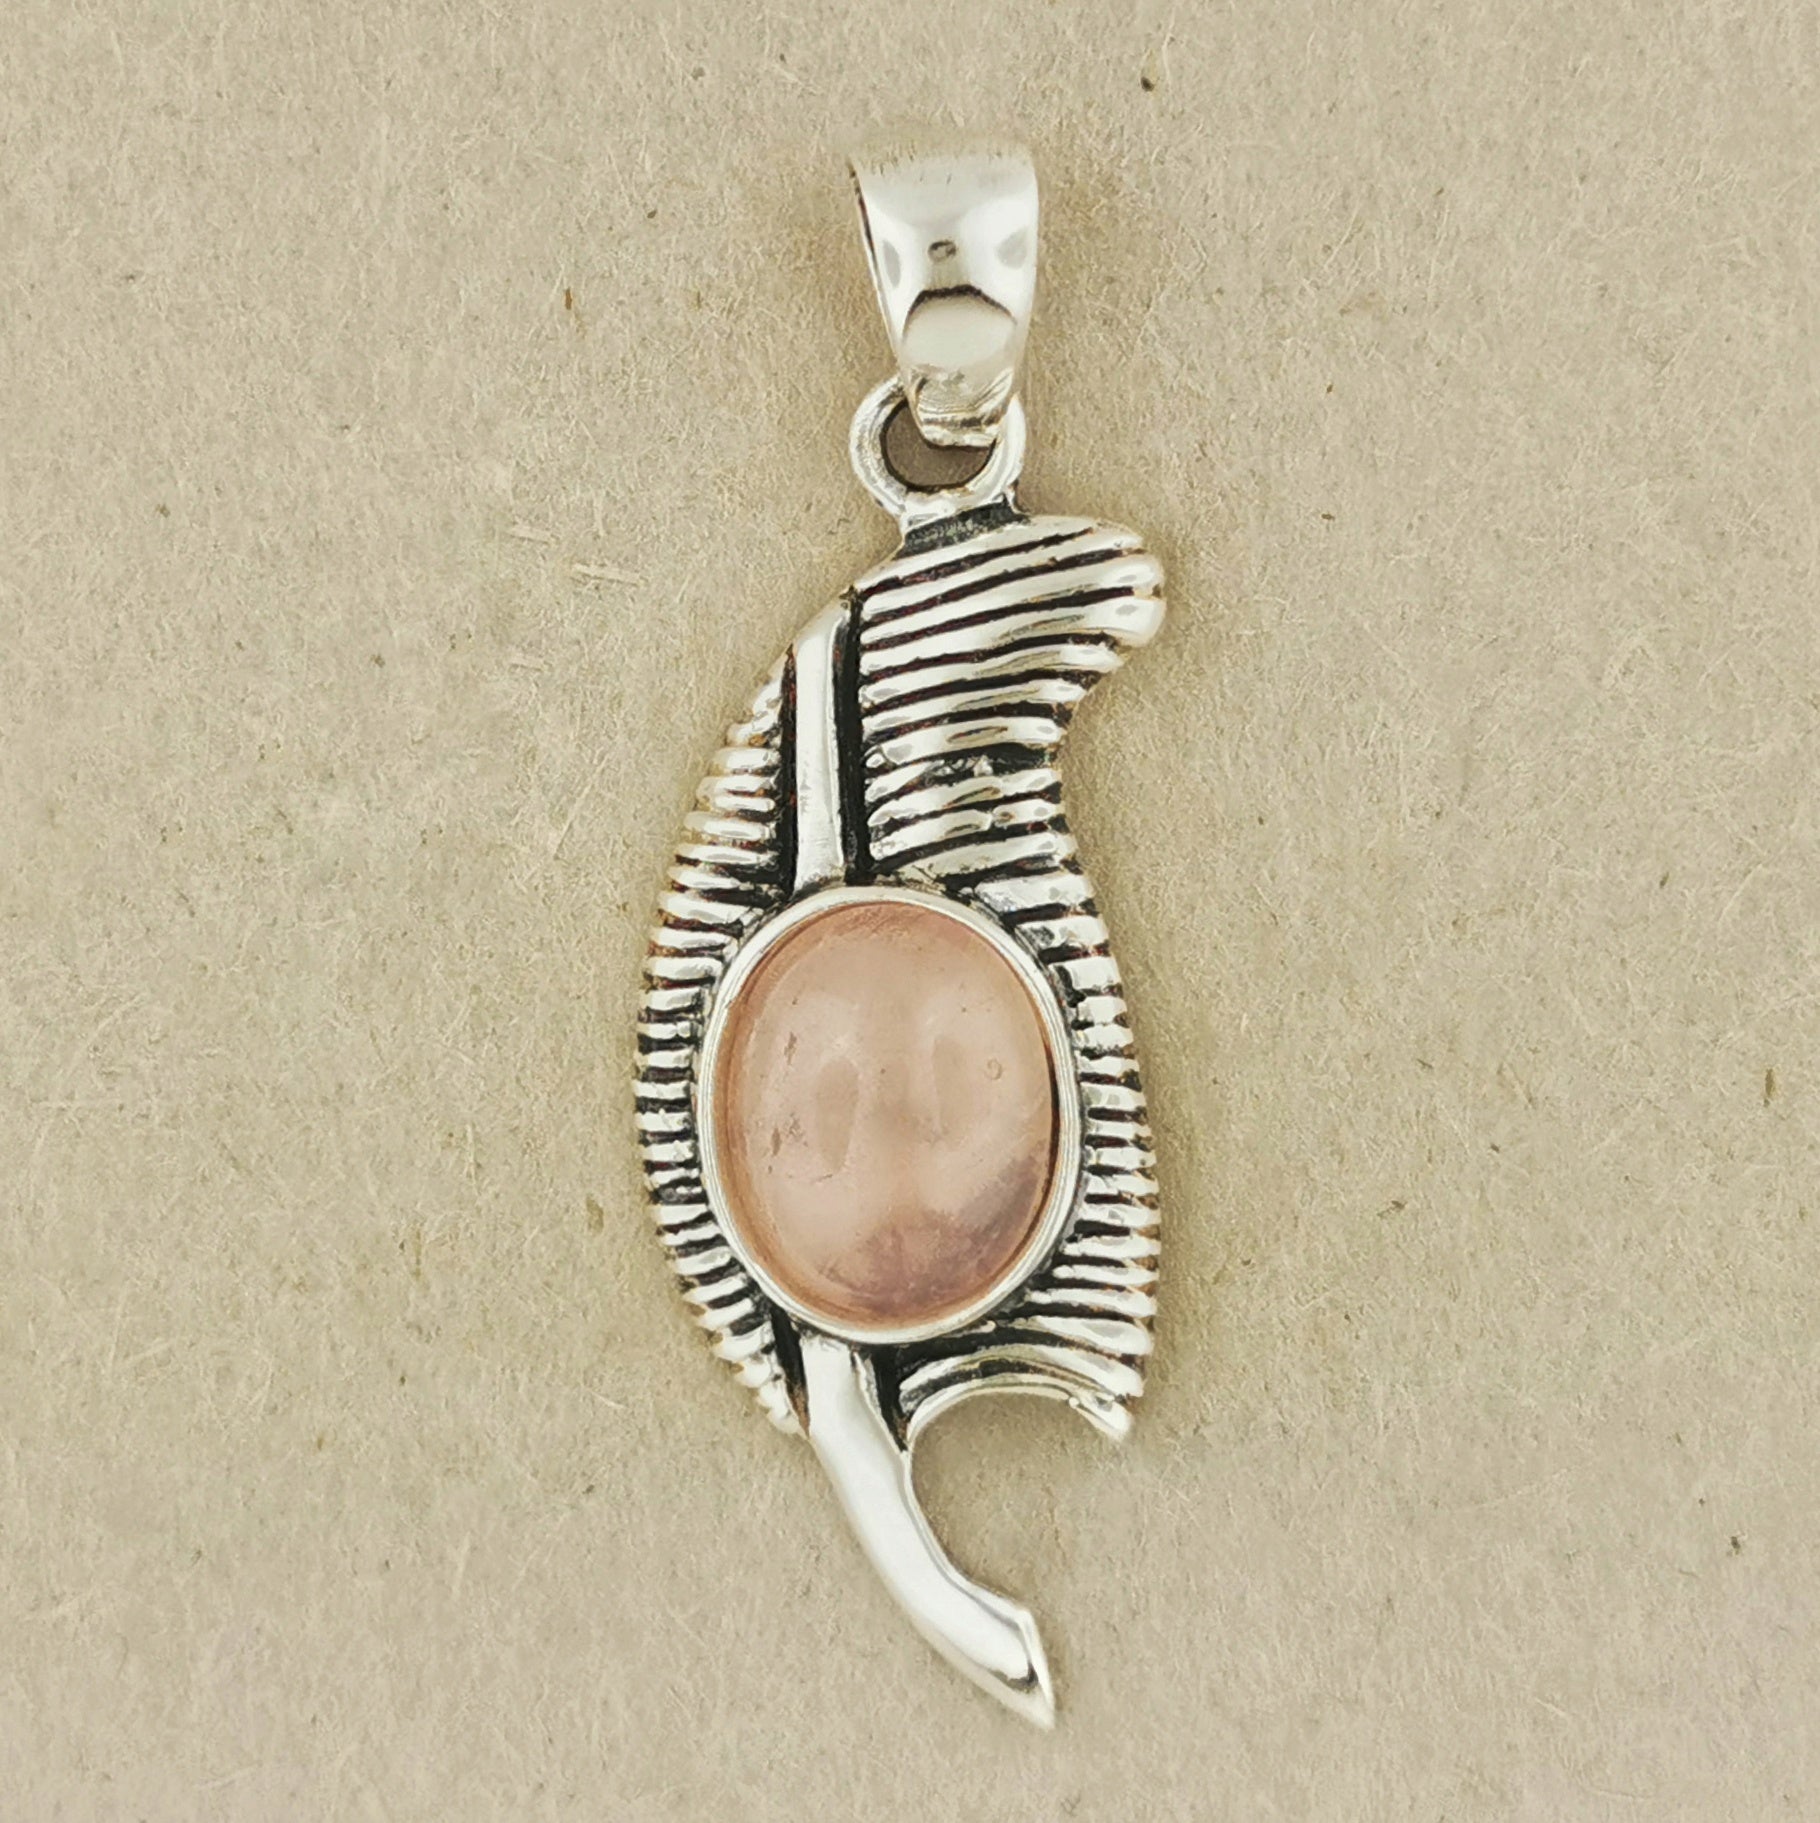 Feather of Ma'at Pendant in Sterling Silver with Rose Quartz, Egyptian Feather Pendant, Egyptian Goddess Pendant, Goddess of Truth Pendant, Silver Egyptian Feather Pendant, Silver Ma’at Pendant, Egyptian Silver Pendant, Silver Gemstone Egyptian Feather Pendant